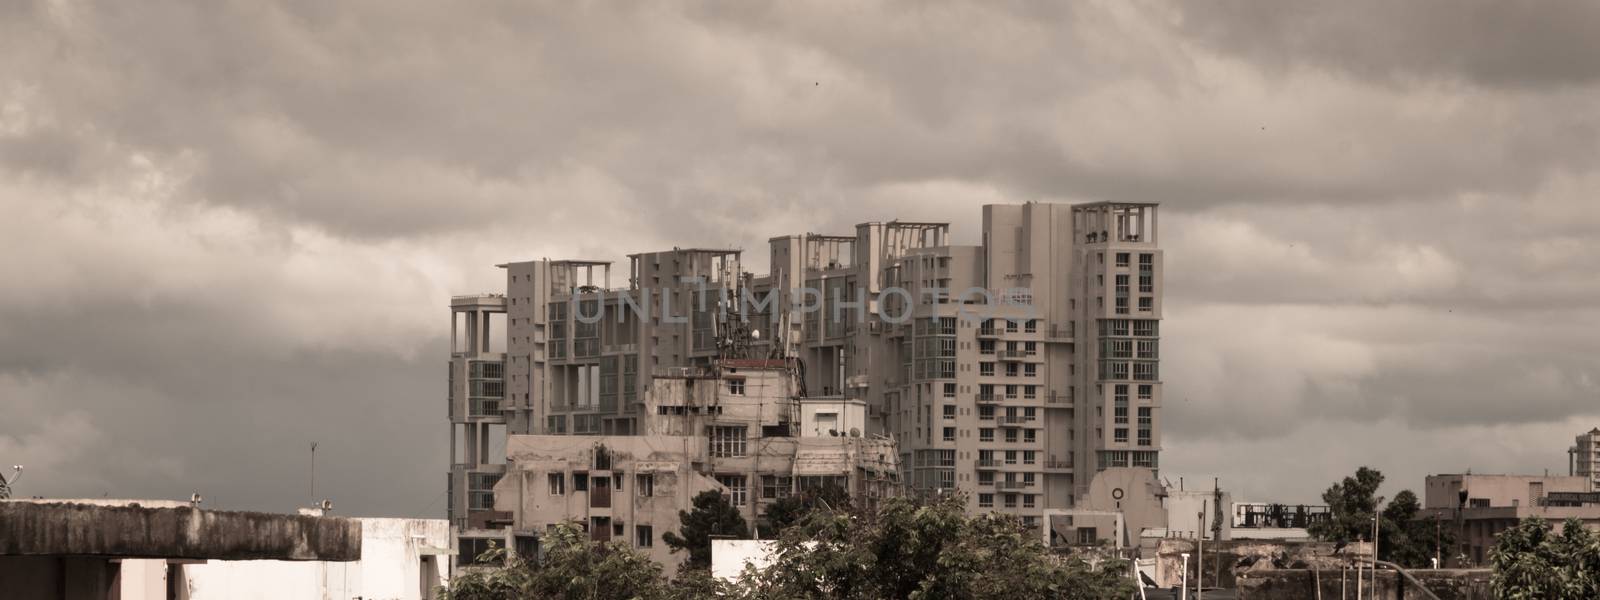 Storms dark early monsoons over modern residential skyscrapers. Kolkata, Bengal India. Monsoon Rainy day city in evening. Heavy Stormy rain clouds up above highrise. A landscape nature Photography. by sudiptabhowmick